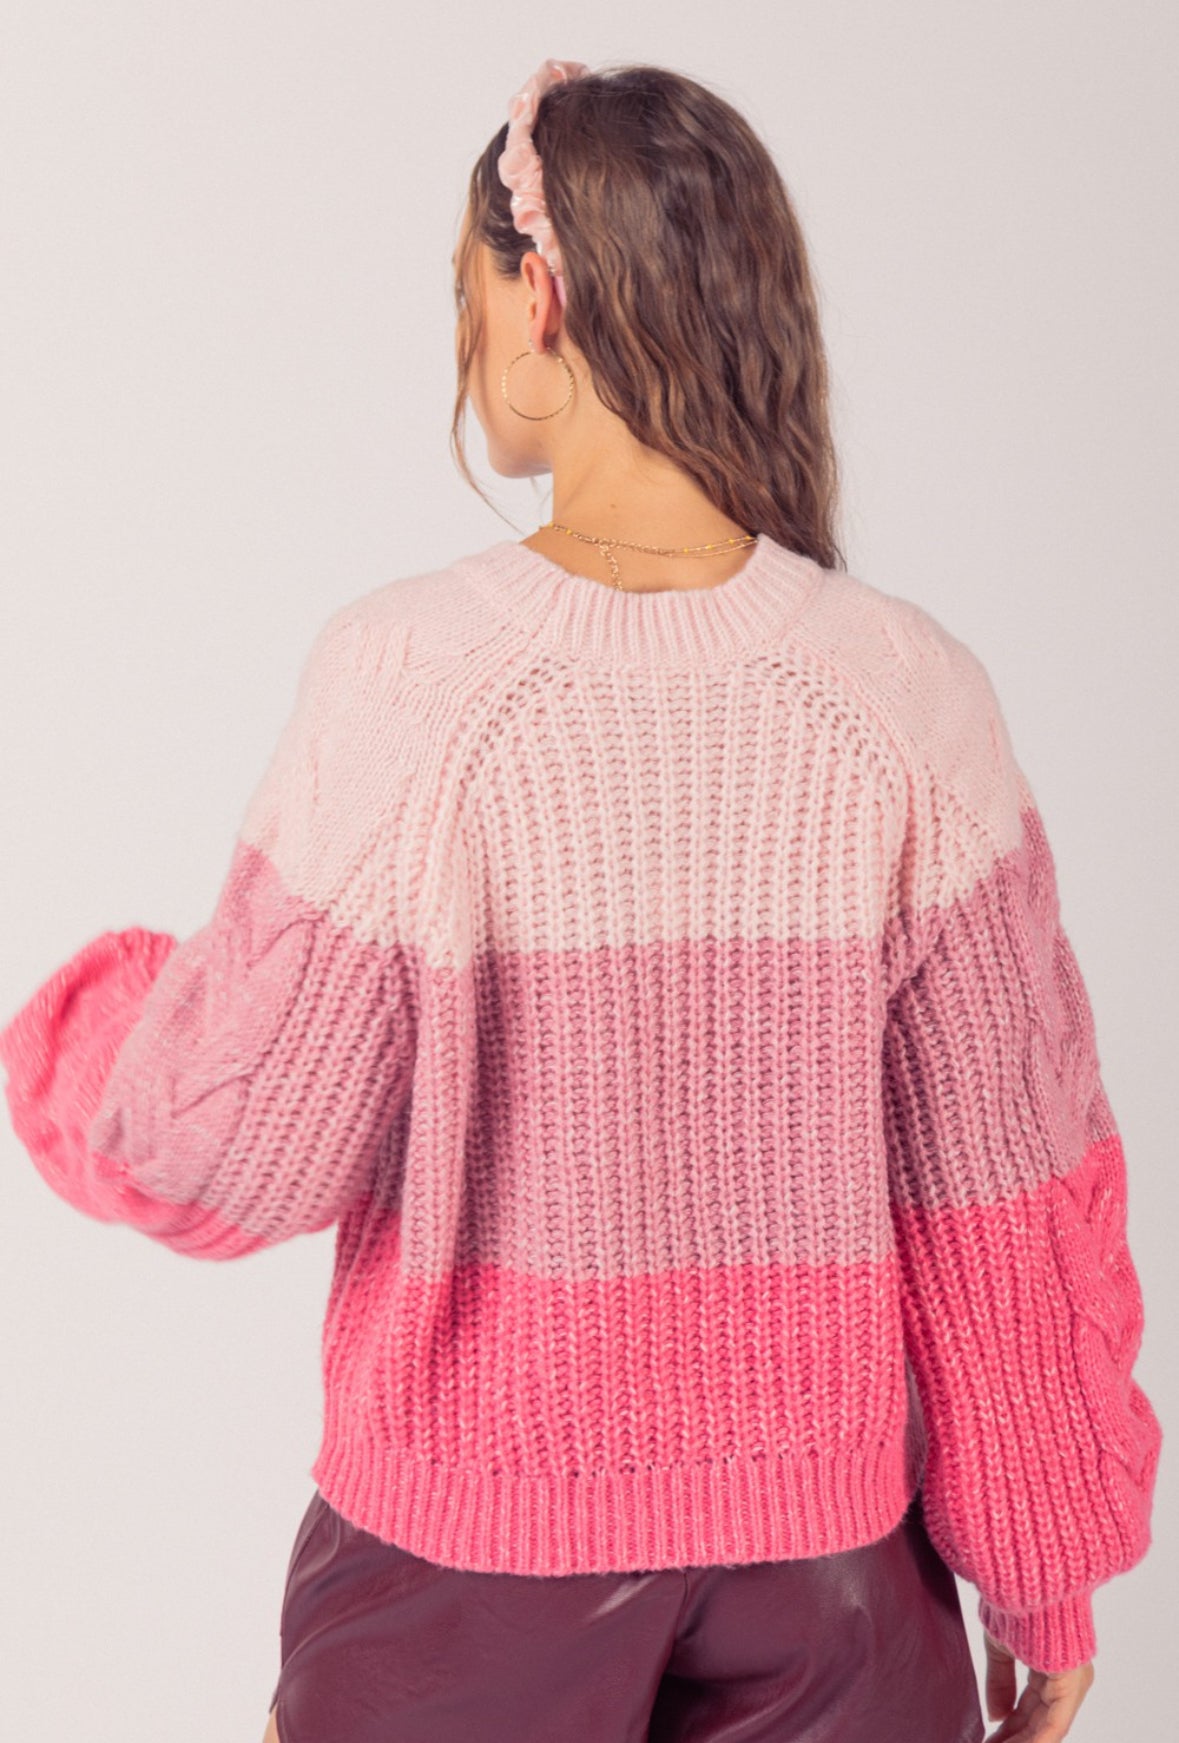 Cotton Candy Kiss Sweater